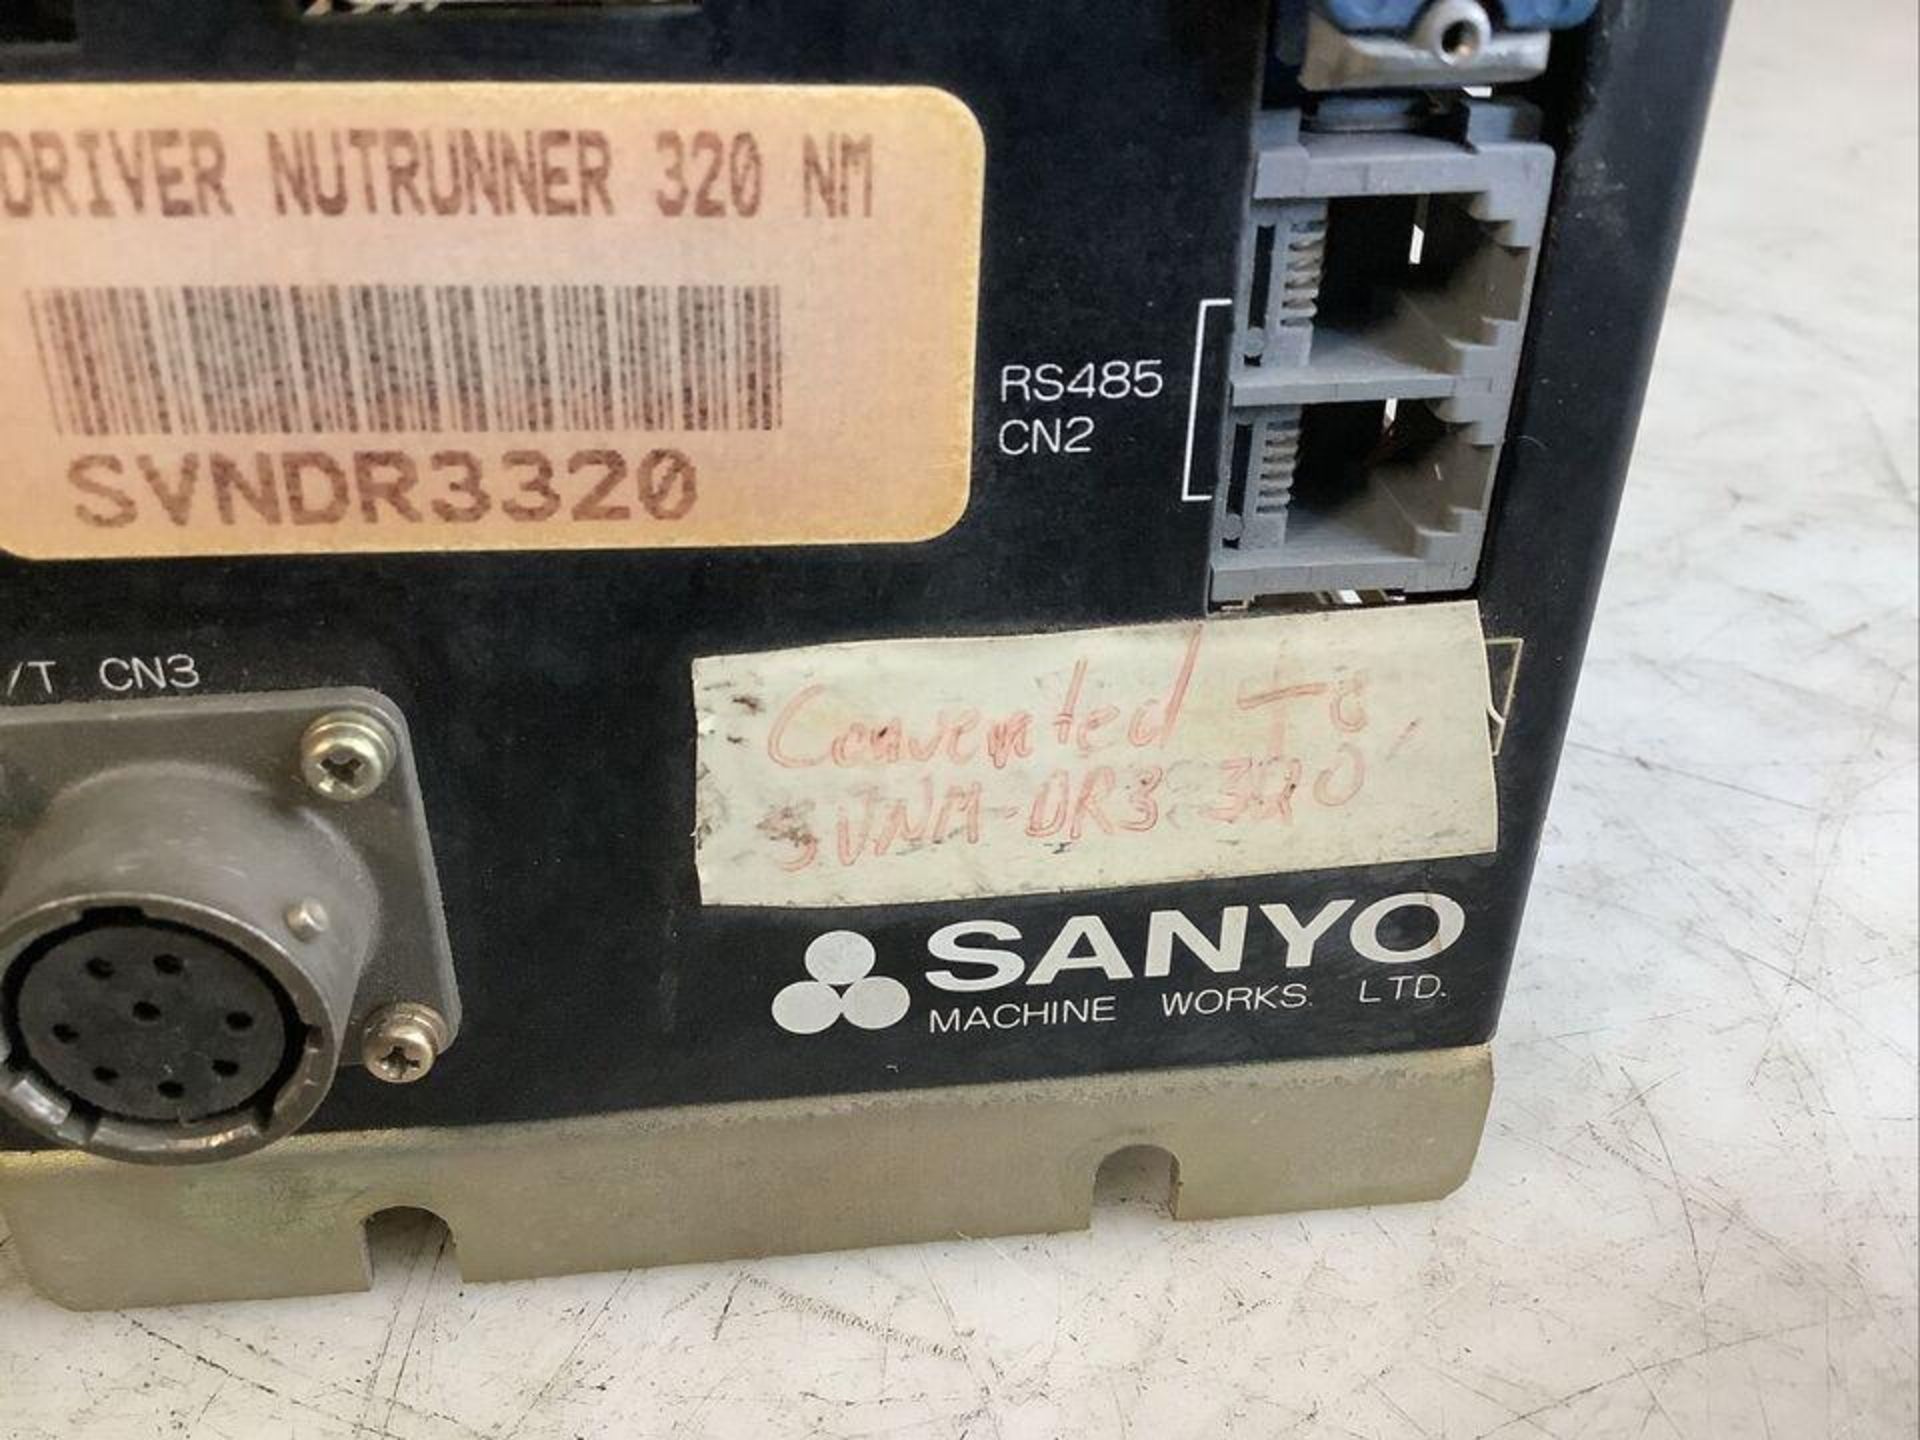 ...( 28 ) SANYO NUT RUNNERS AND NUT RUNNER DRIVER OF MULTIPLE CAPACITIES, SIZES, & MODEL NUMBERS; - Image 45 of 61